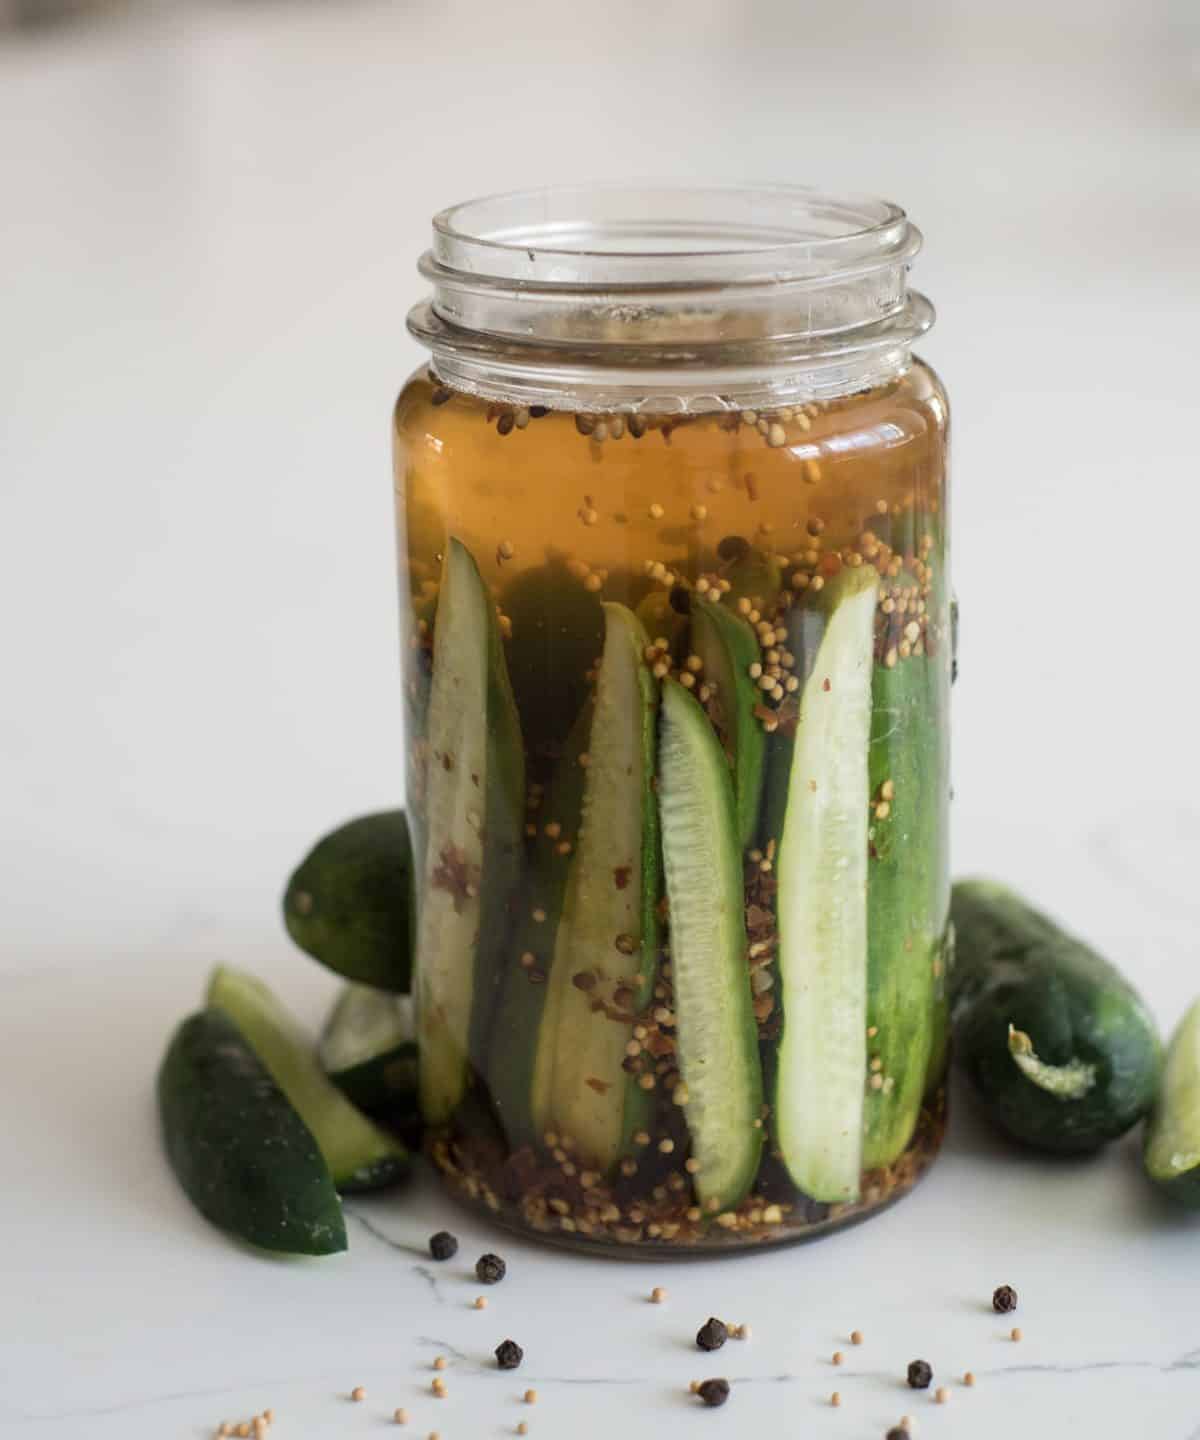 Sweet and spicy cucumbers and vinegar make the most delicious refrigeration pickles that only take about 5 minutes to make.